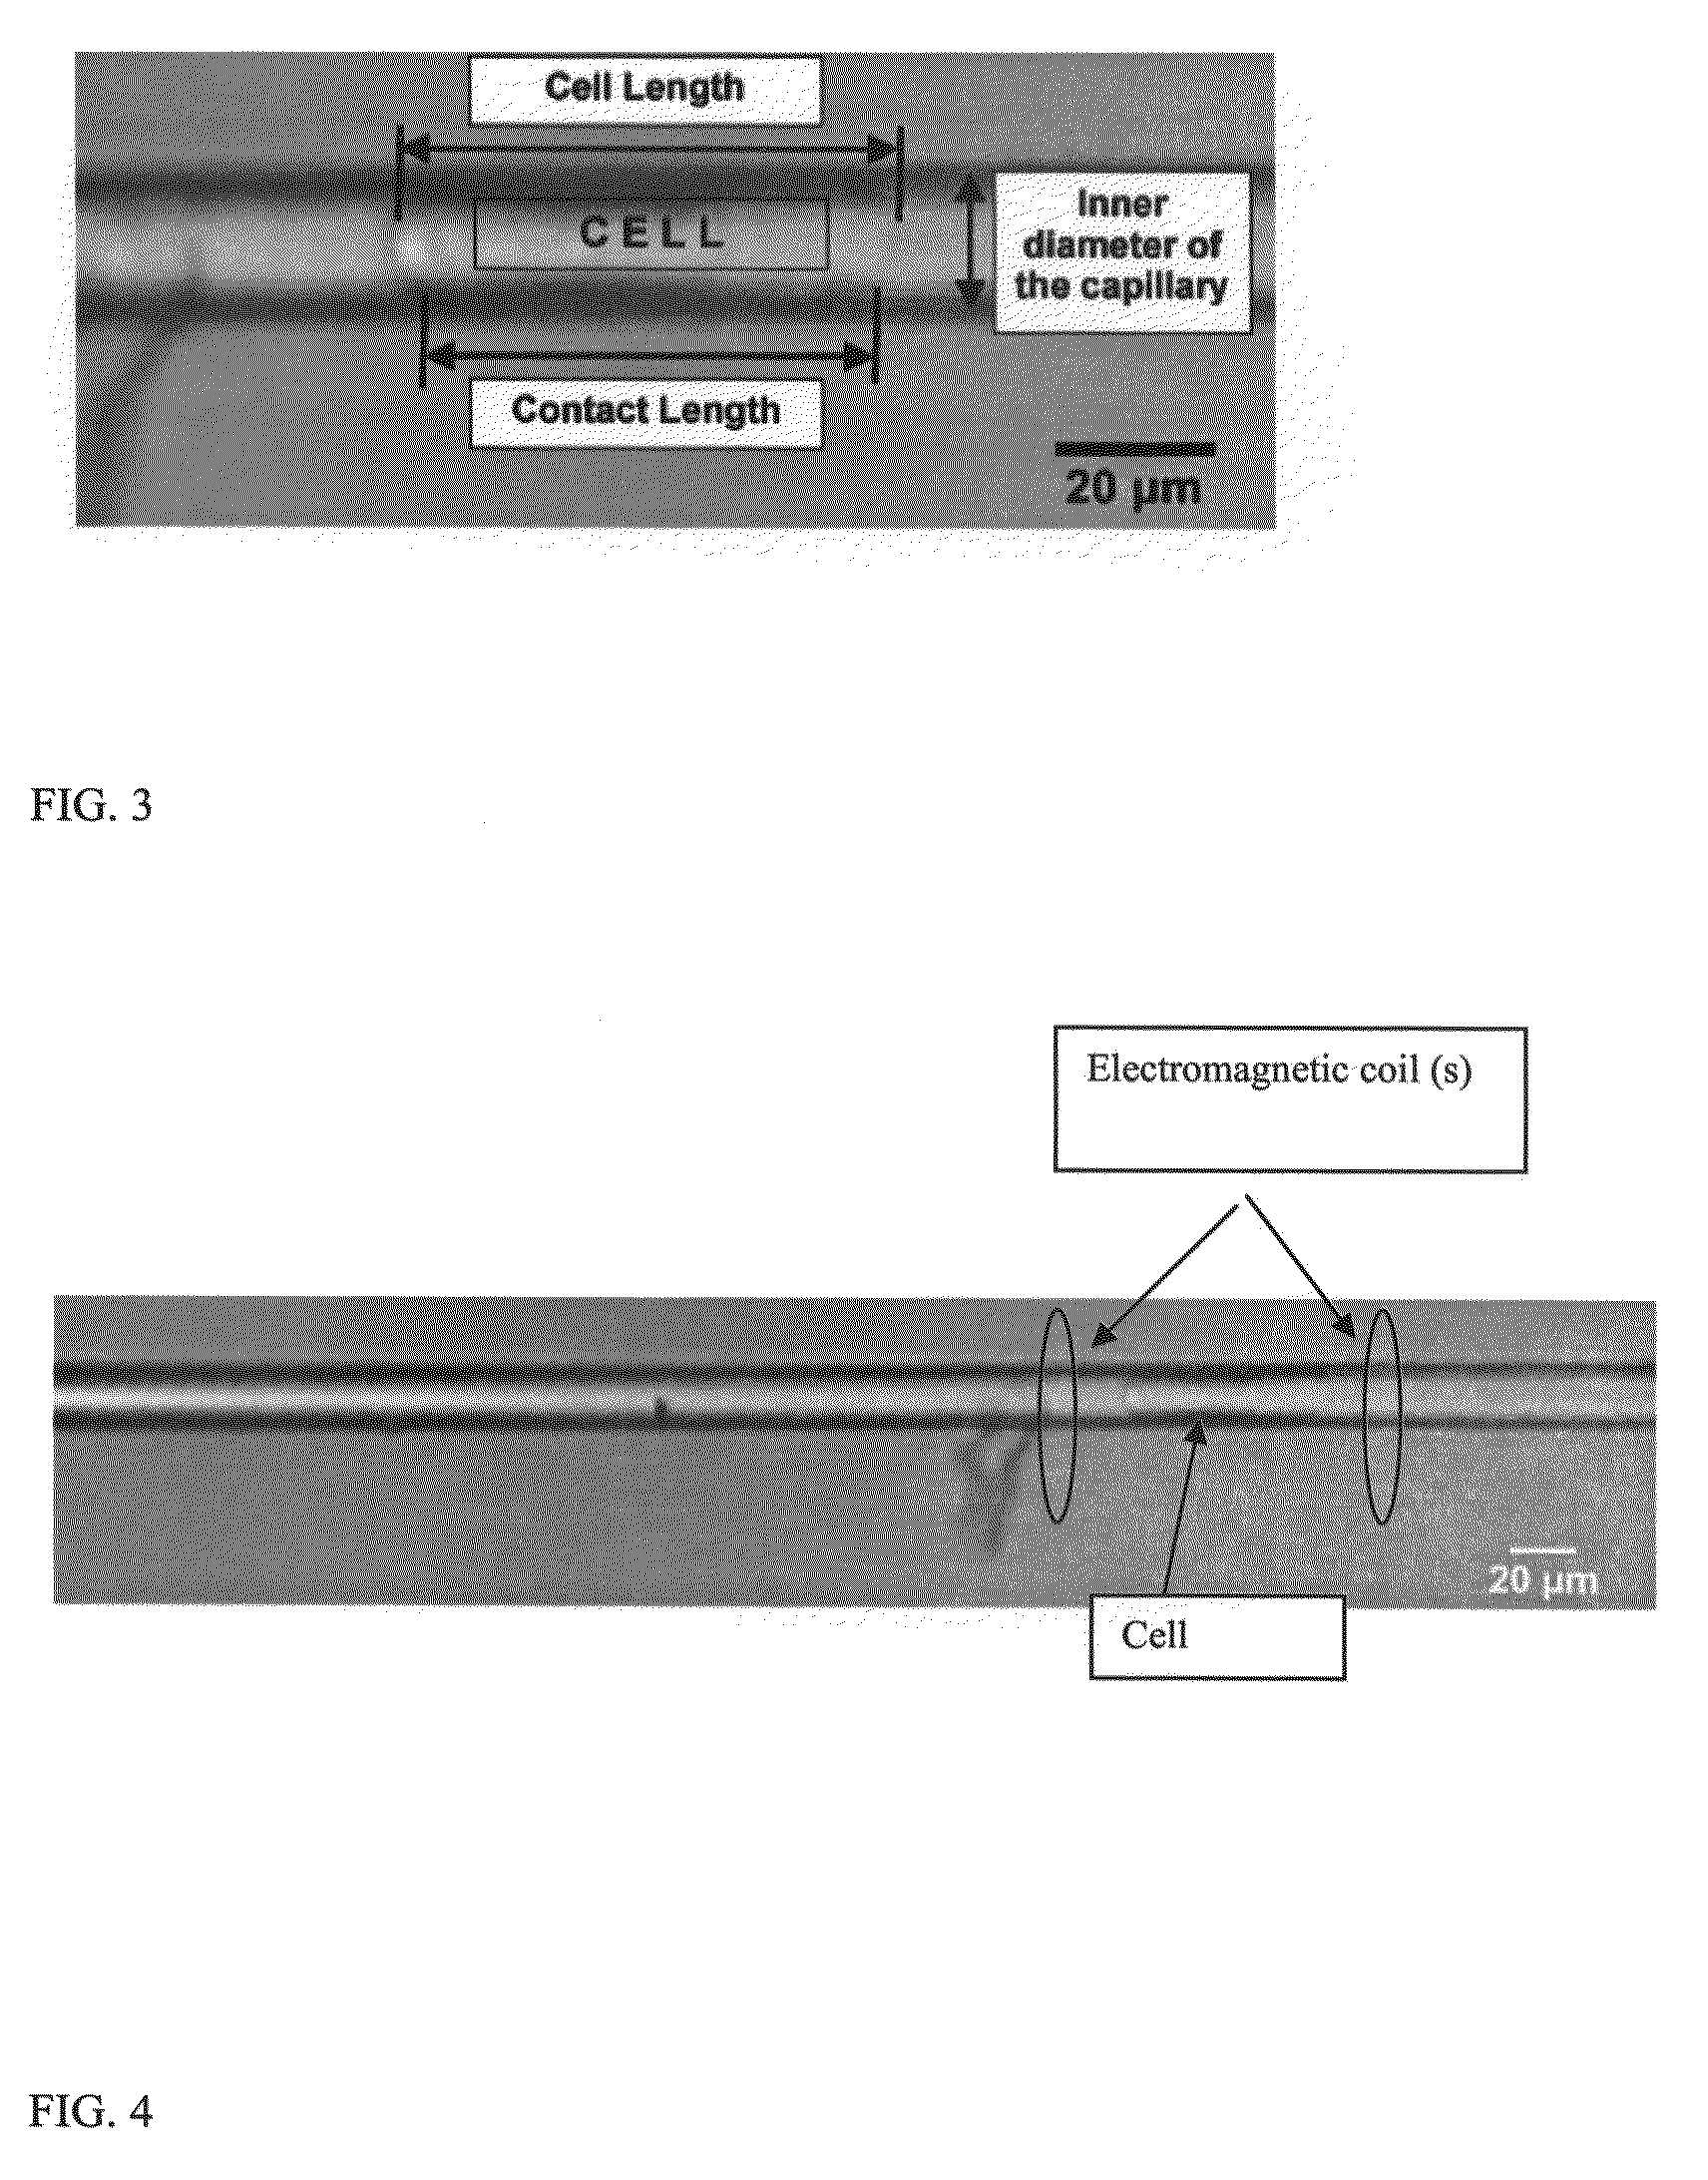 Systems and methods for analyzing and manipulating biological samples